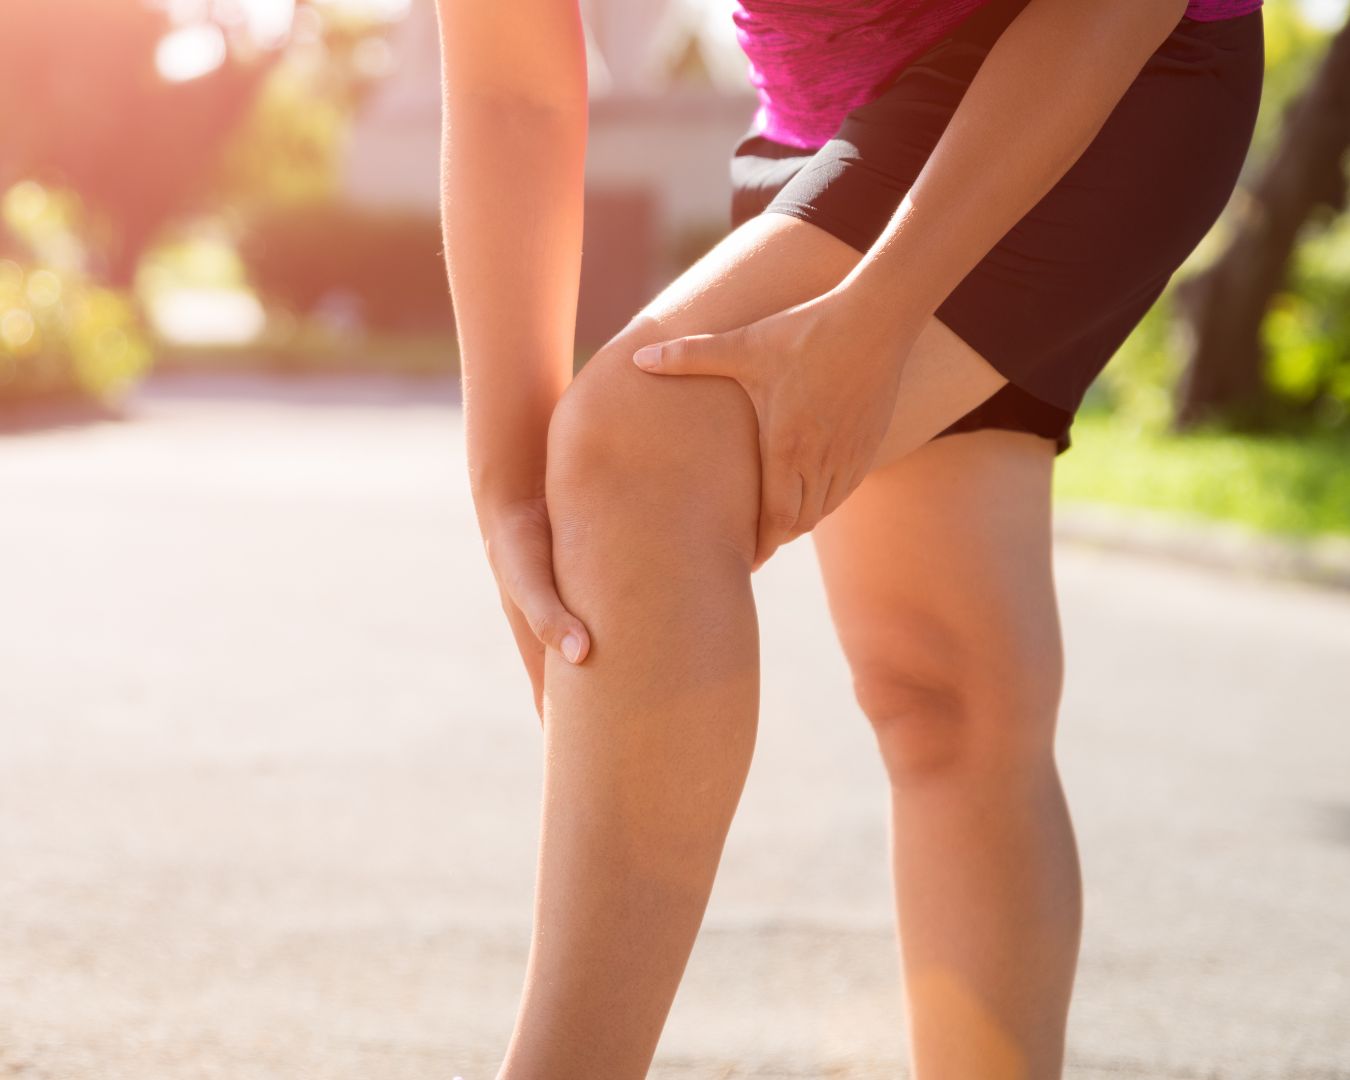 Knee pain with running - What are the 3 most common causes, and what to do about it